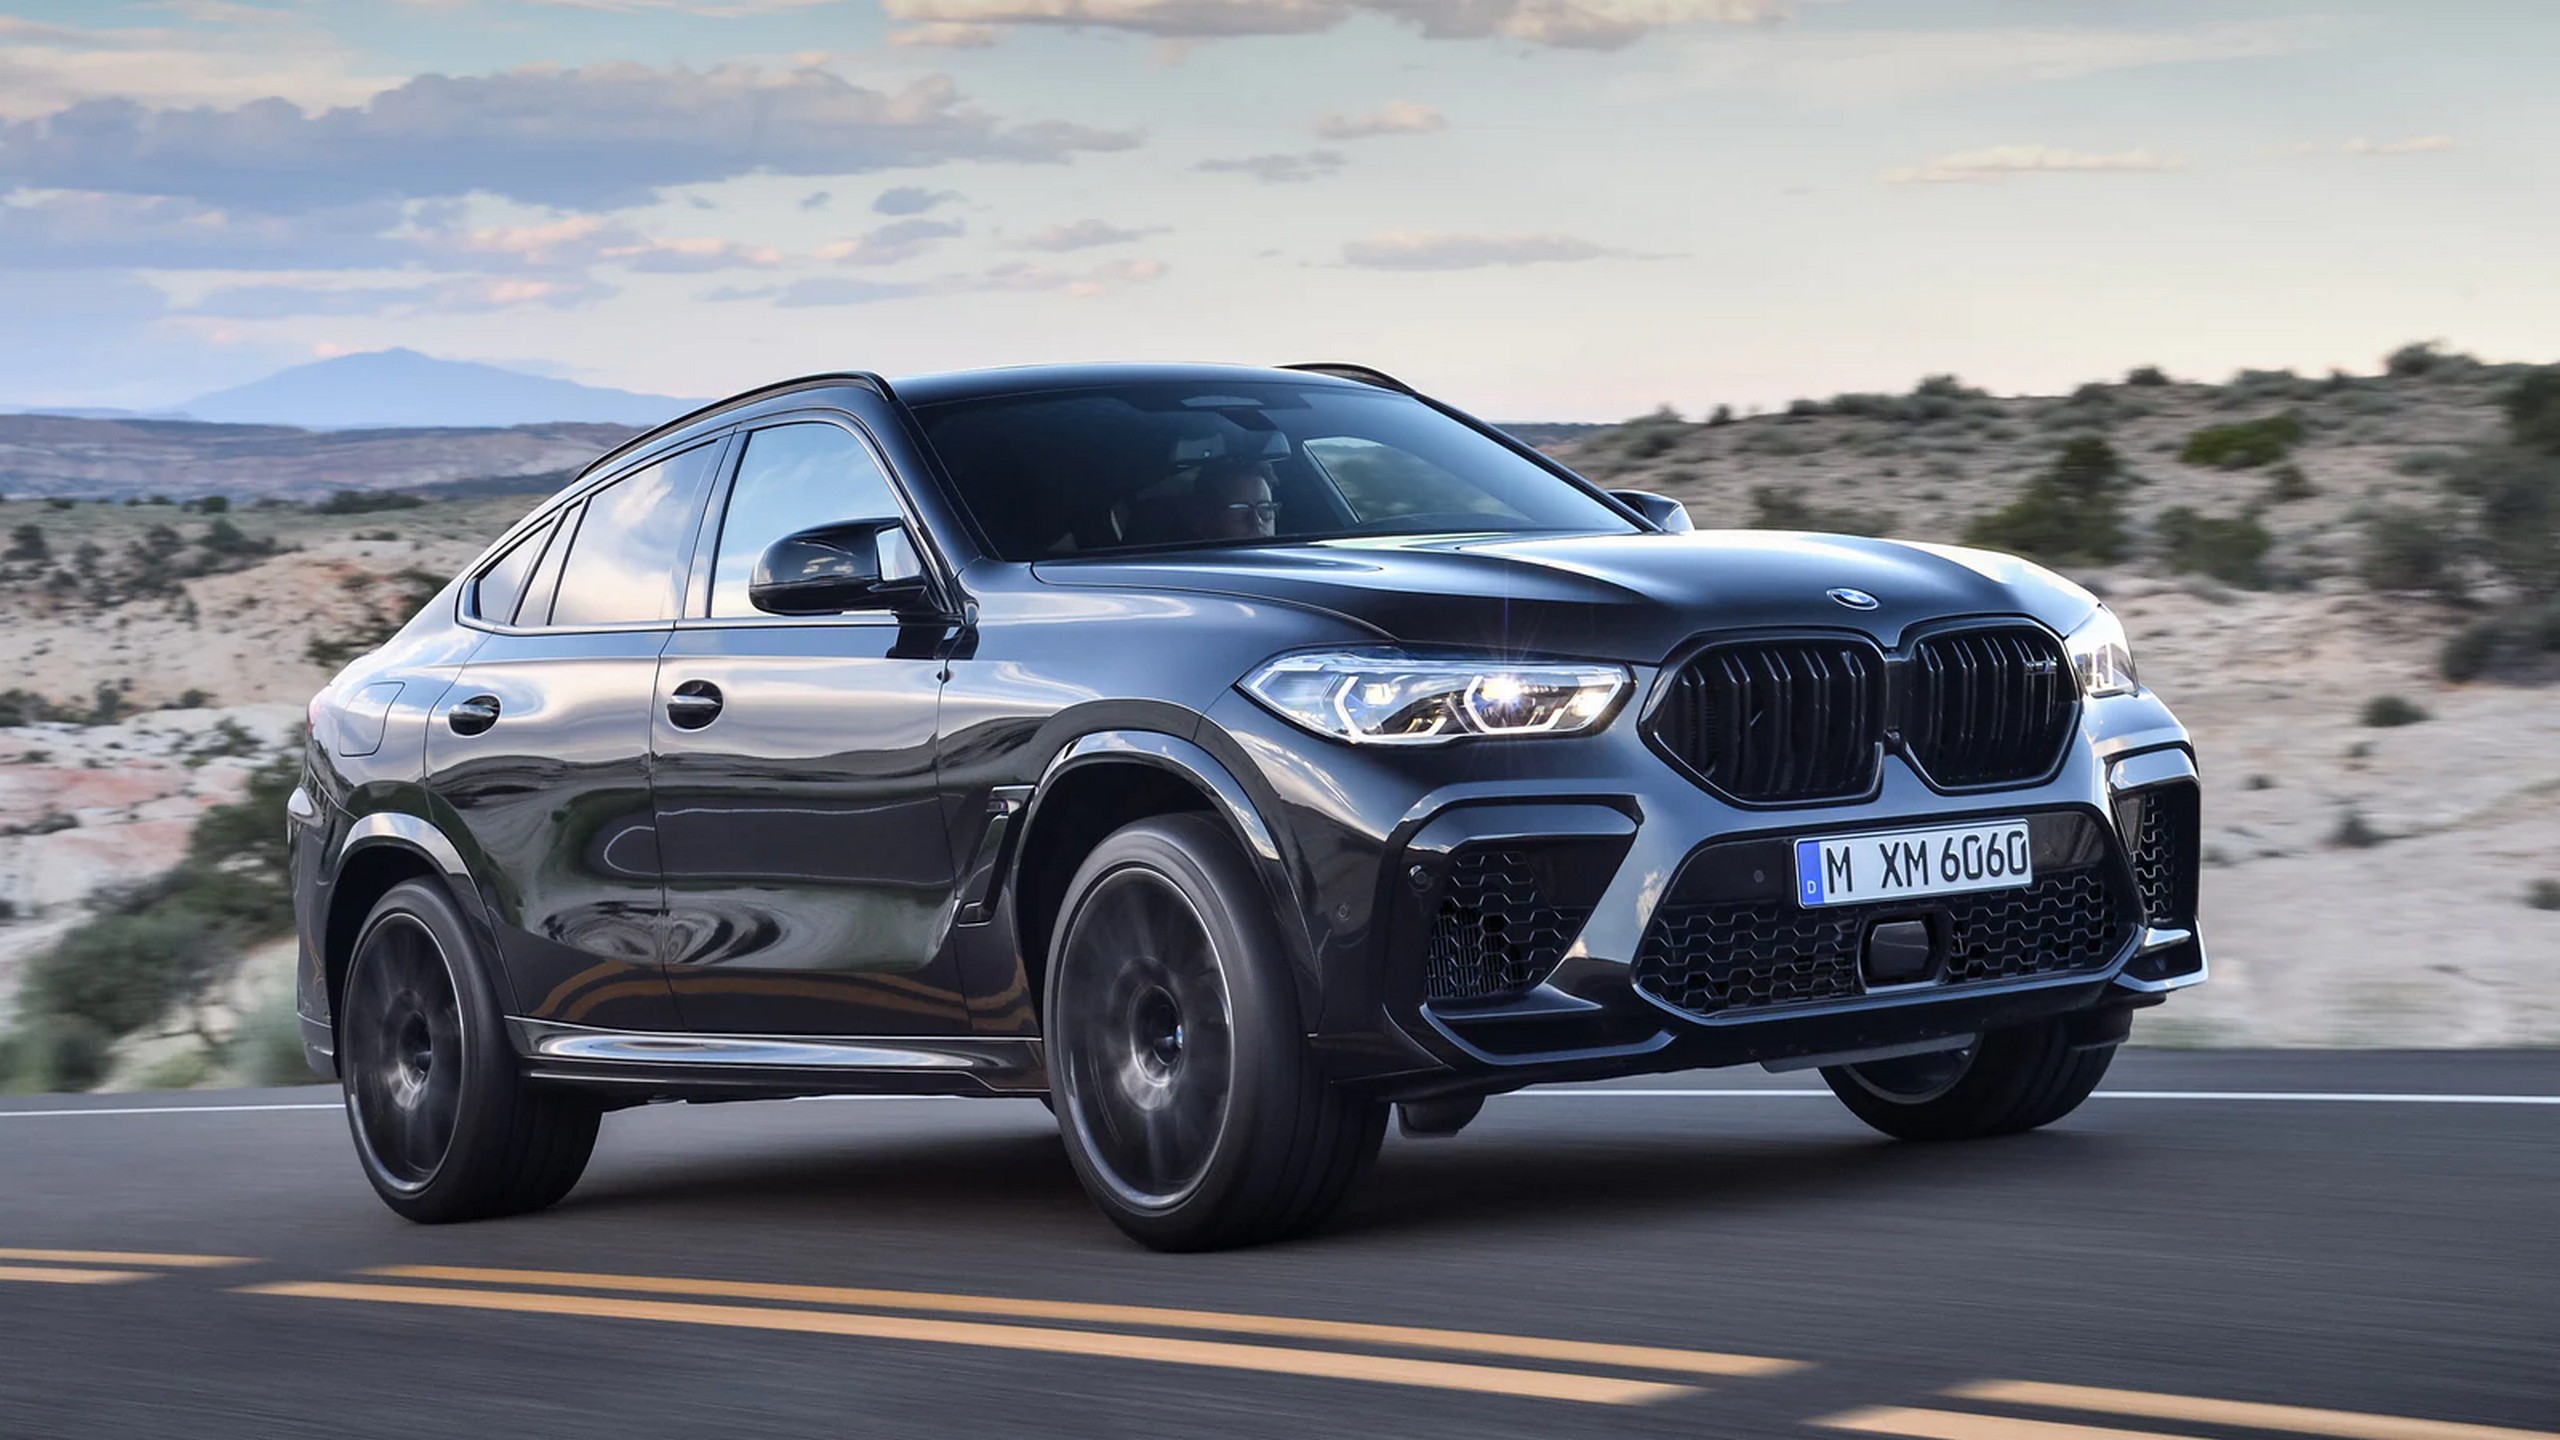 Bmw X6 M The Easiest Suv To Hate In The World Or Are We Just Jealous Autoevolution